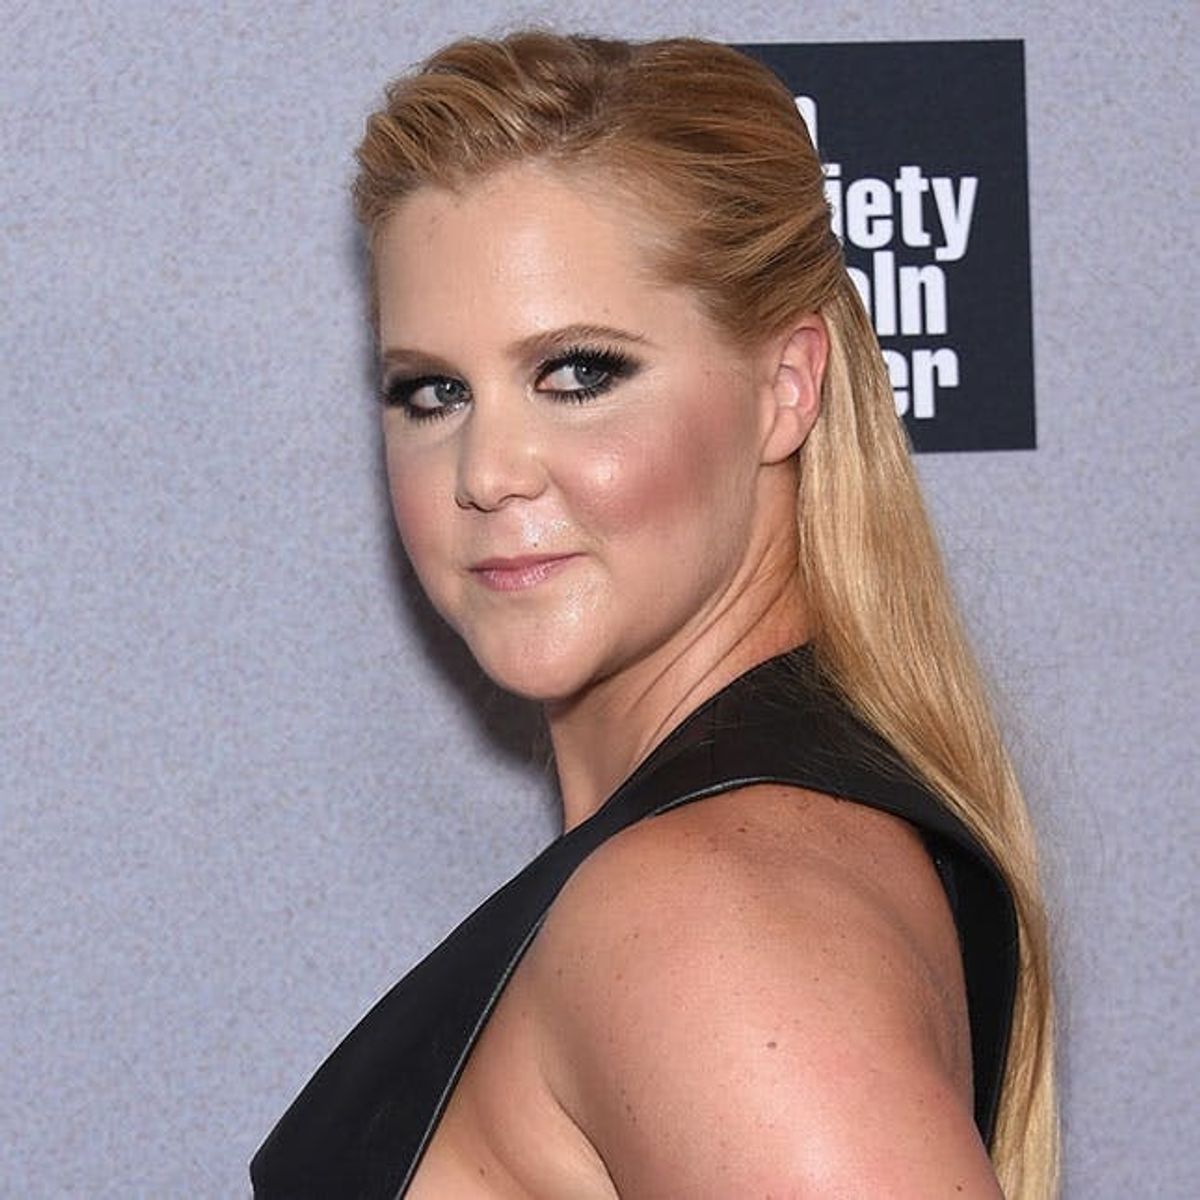 Amy Schumer Just Pulled Off Classy Sideboob